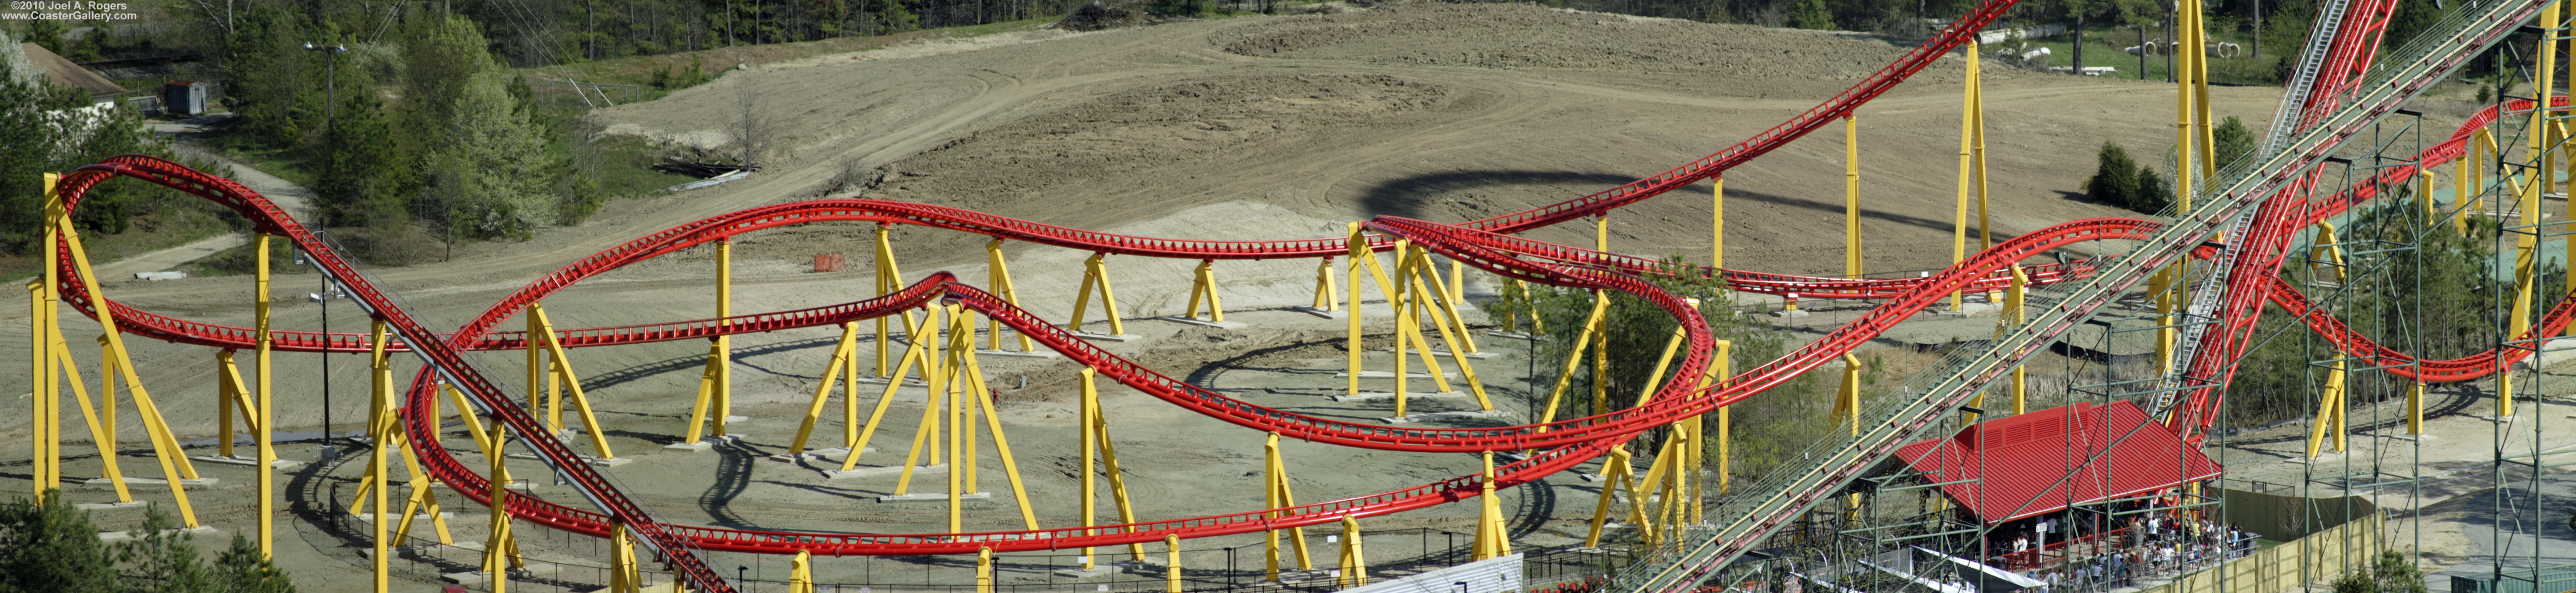 Panoramic image of the Intimidator 305 roller coaster